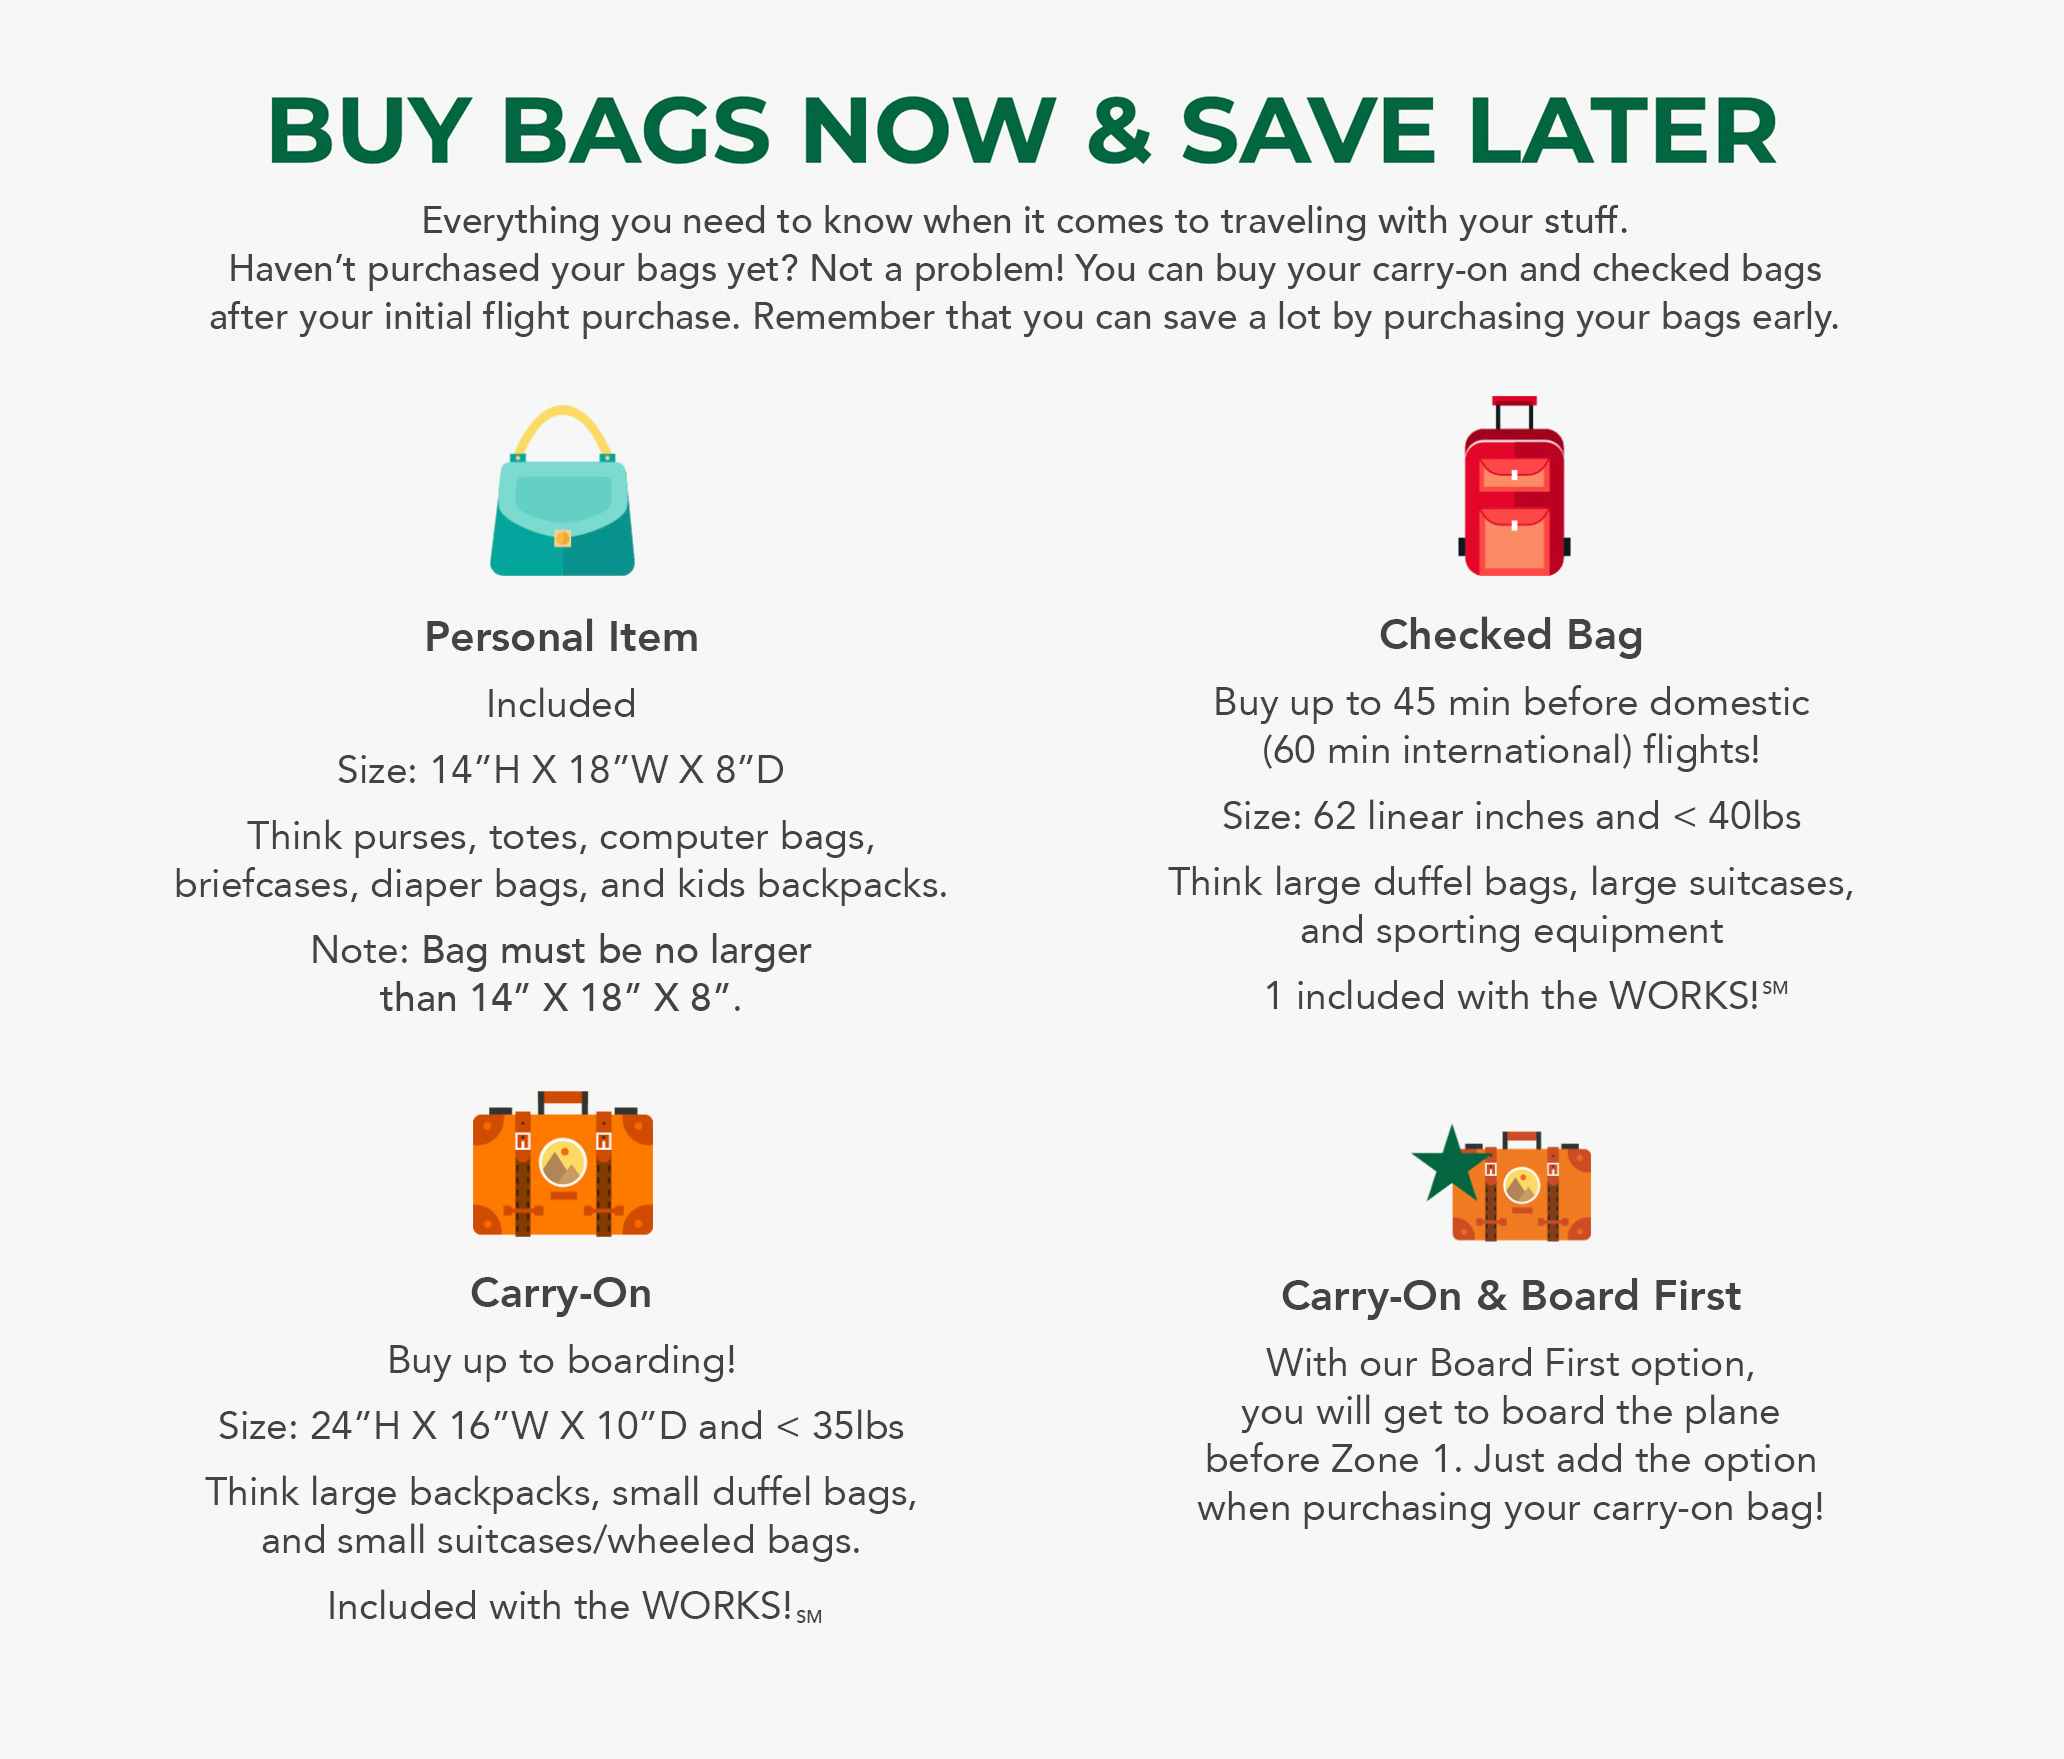 frontier airline buy bags now and save later policy